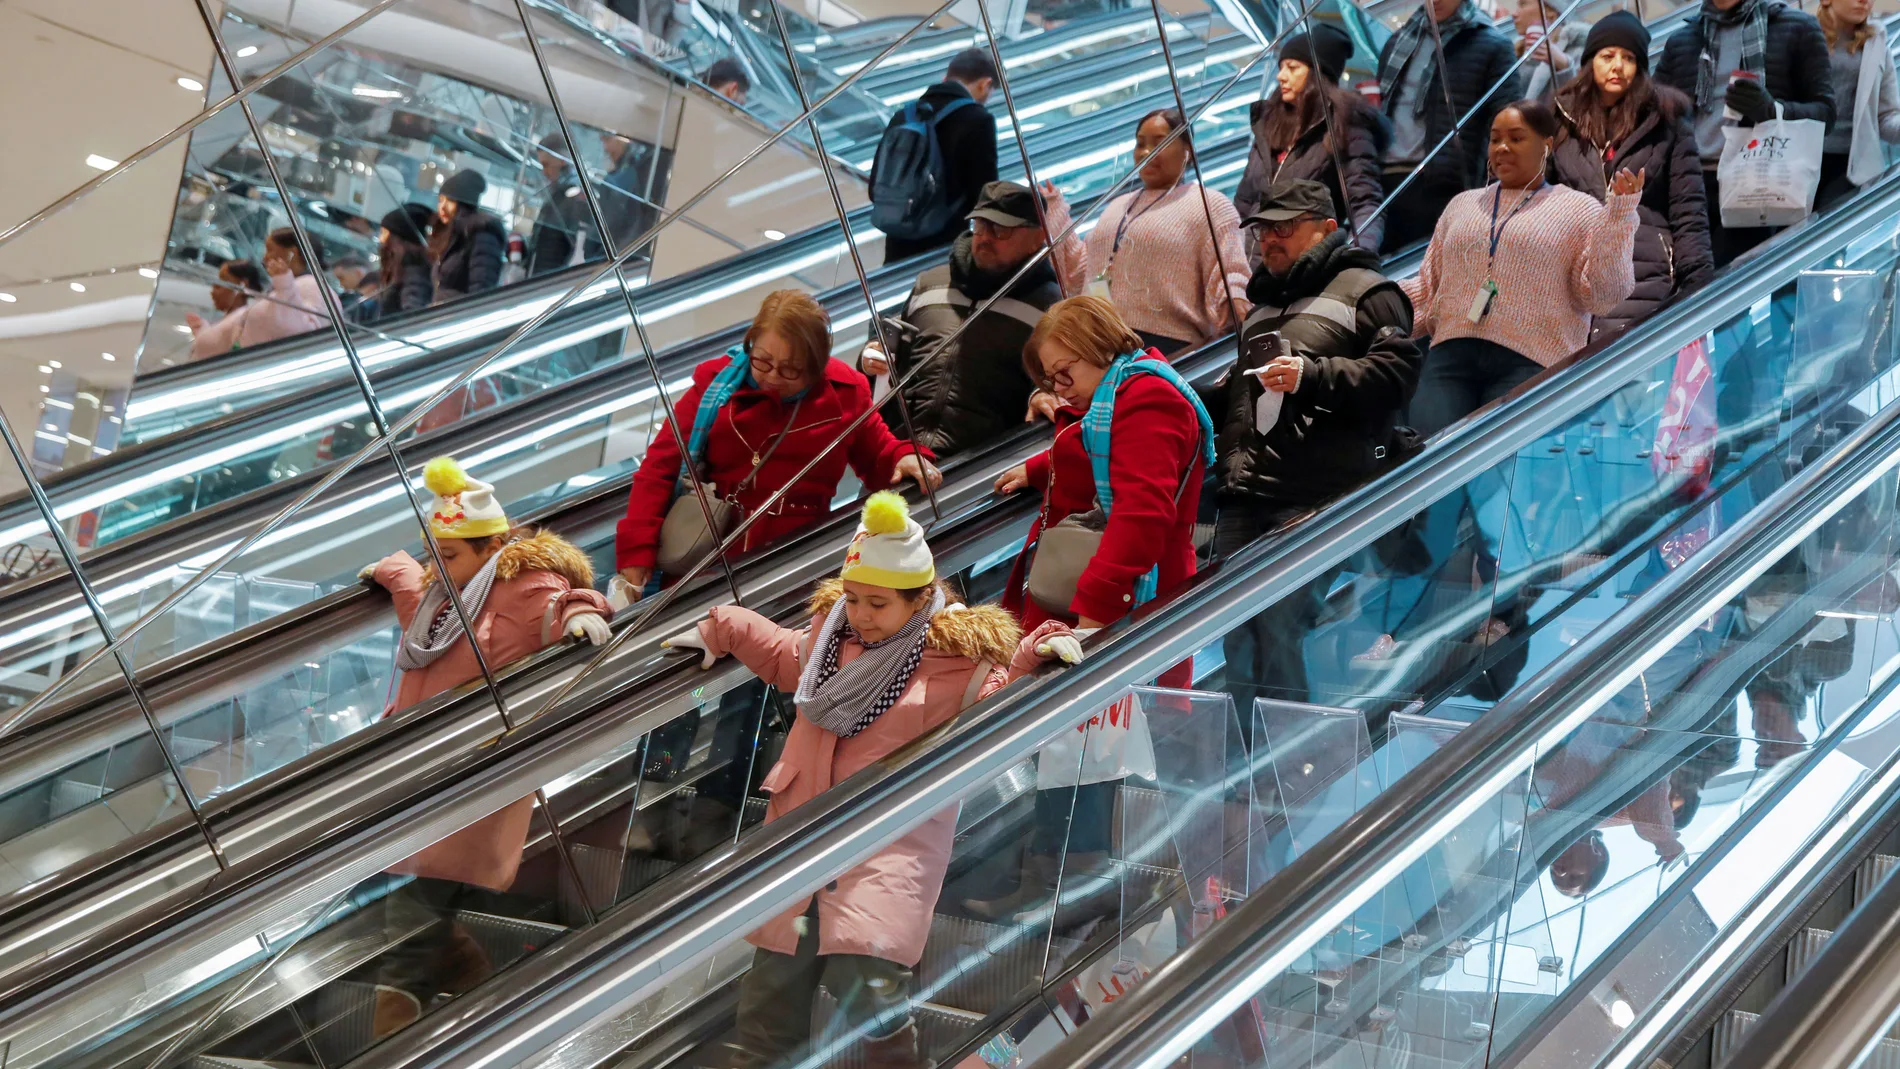 FILE PHOTO: People ride an escalator in H & M during a Black Friday sales event in Manhattan, New York City